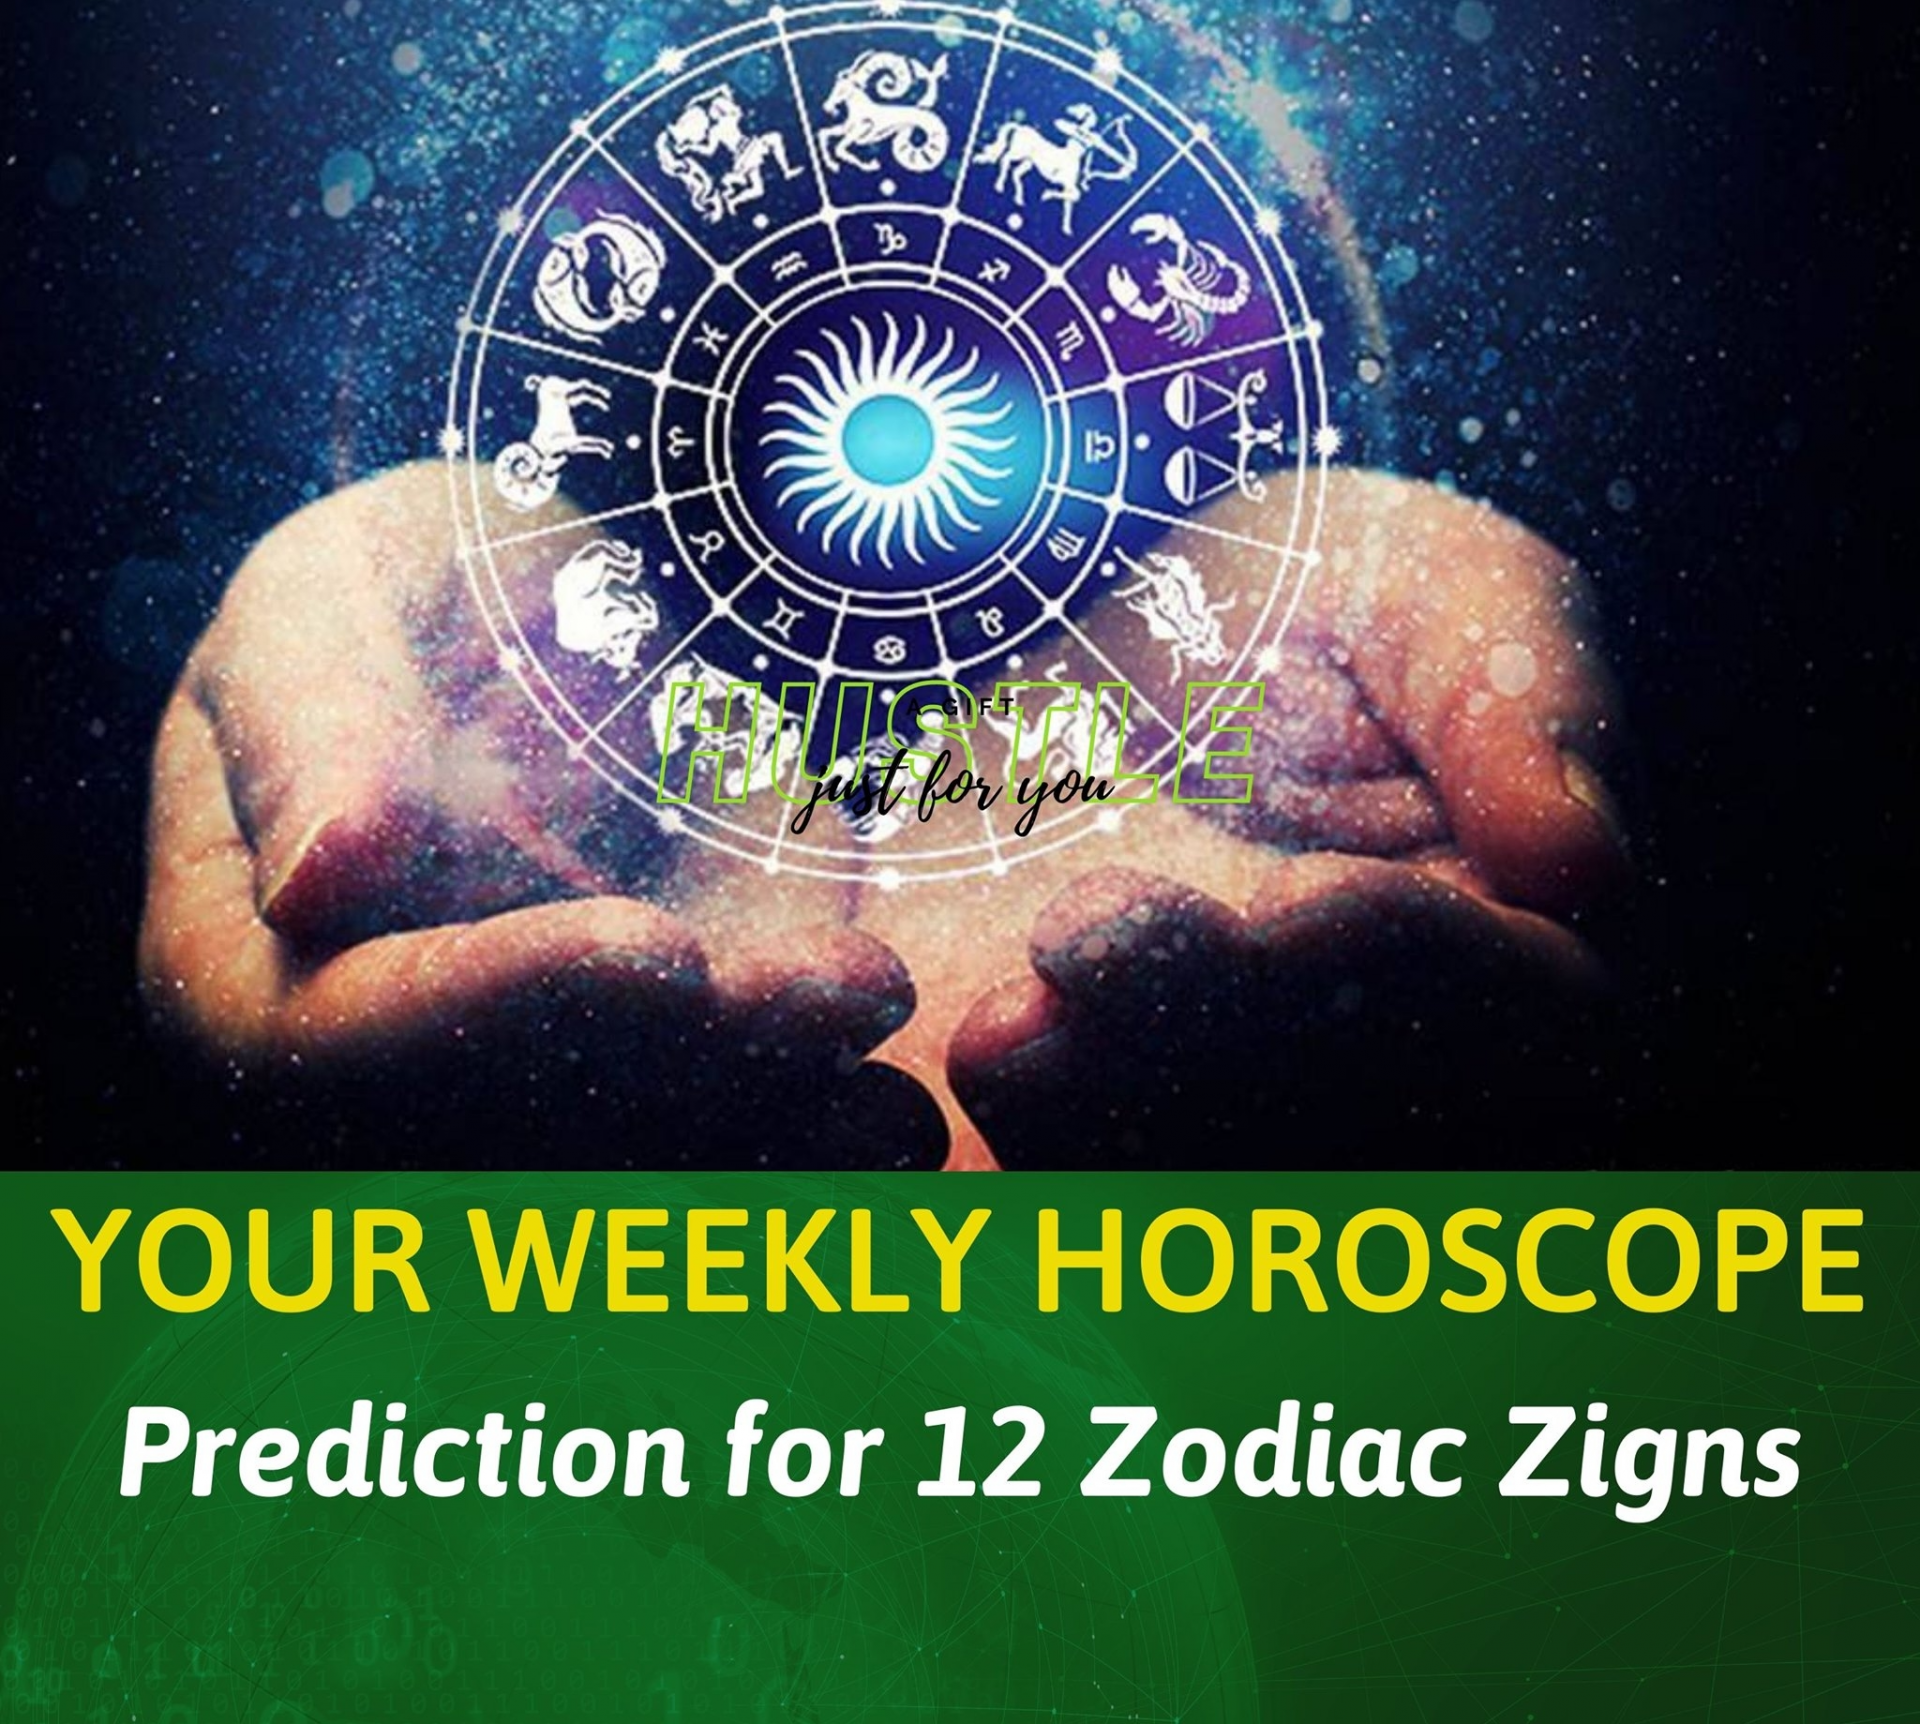 Weekly Horoscope (March 28 - April 4): Accurate Predictions for Love, Money, Career and Health with 12 Zodiac Signs